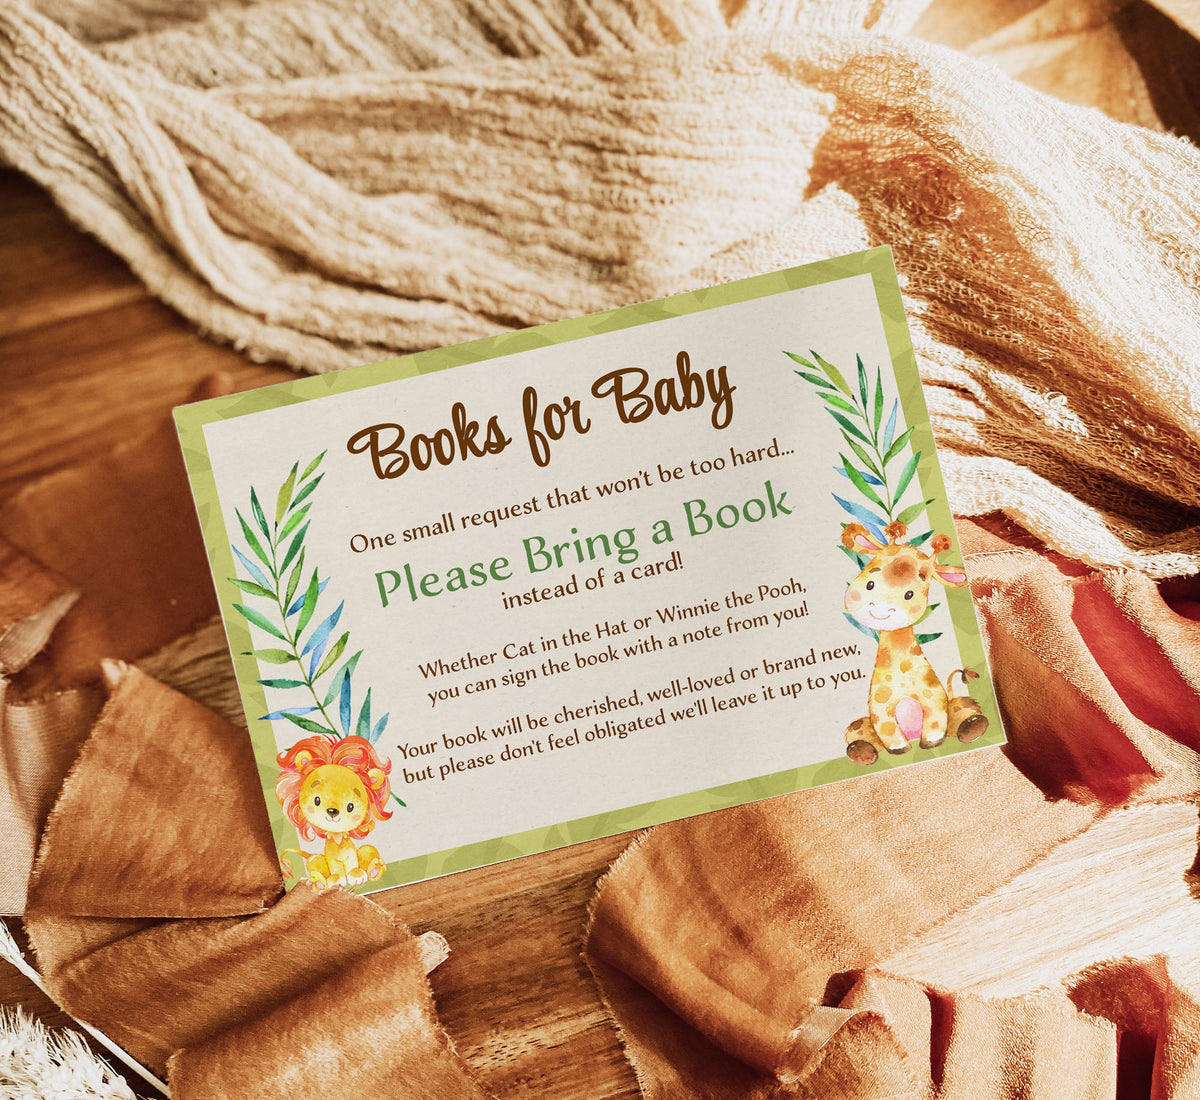 Jungle Books for Baby - Premium Paper & Party Supplies > Paper > Invitations & Announcements > Invitations from Sugar and Spice Invitations - Just $1.50! Shop now at Sugar and Spice Paper